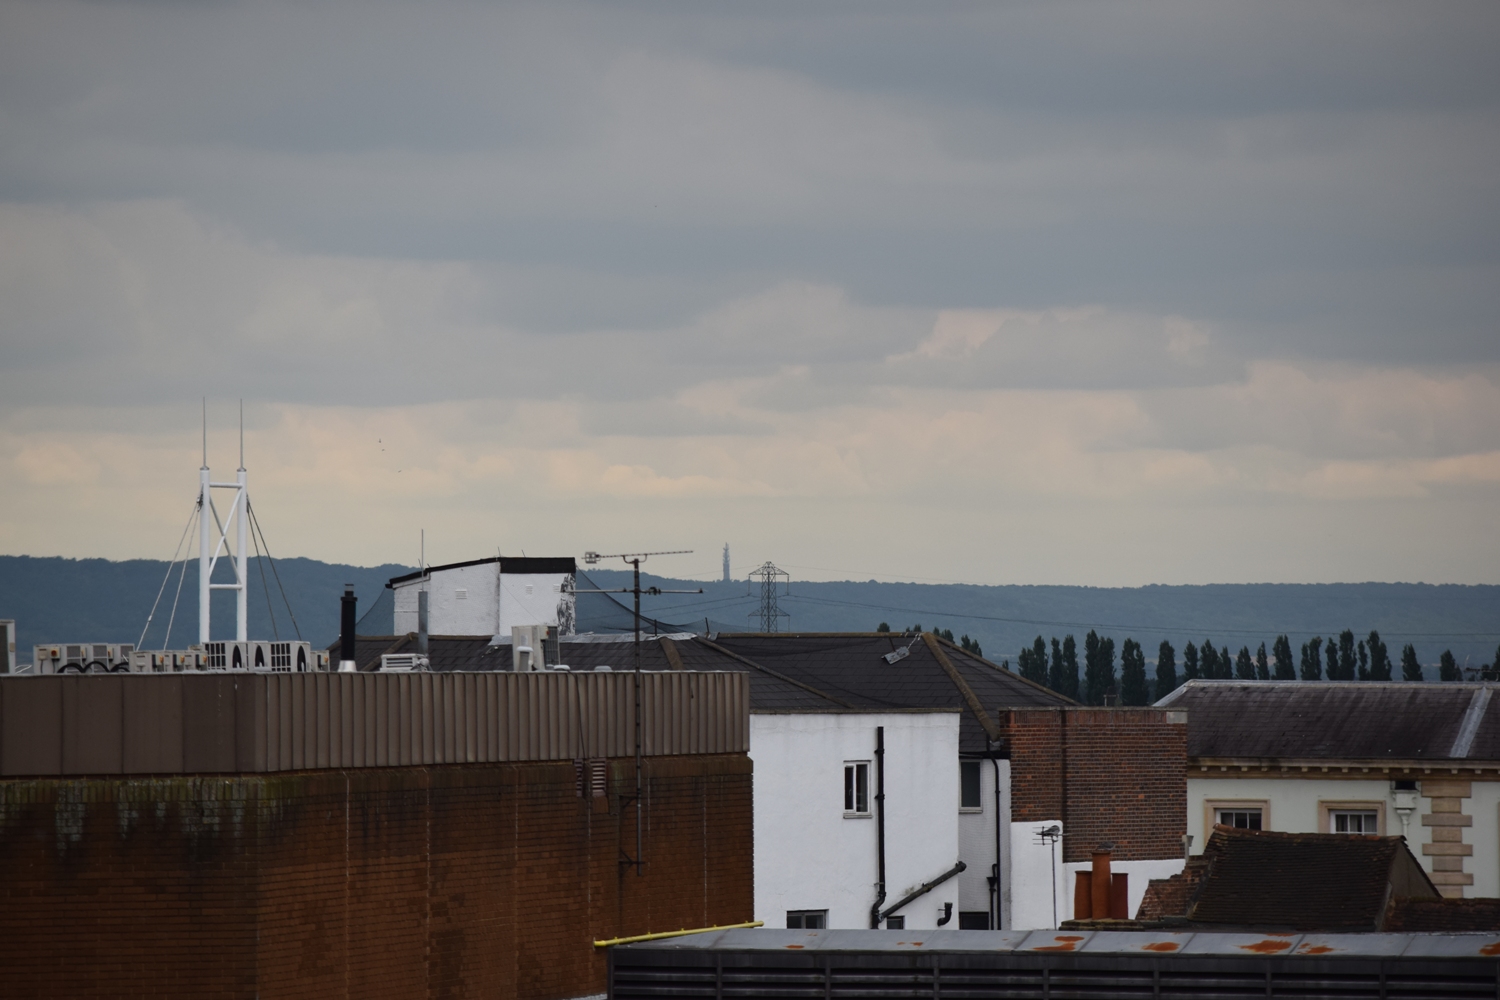 Nikkor 55-300mm Stokenchurch BT Tower from Aylesbury Telephone Exchange, 200mm